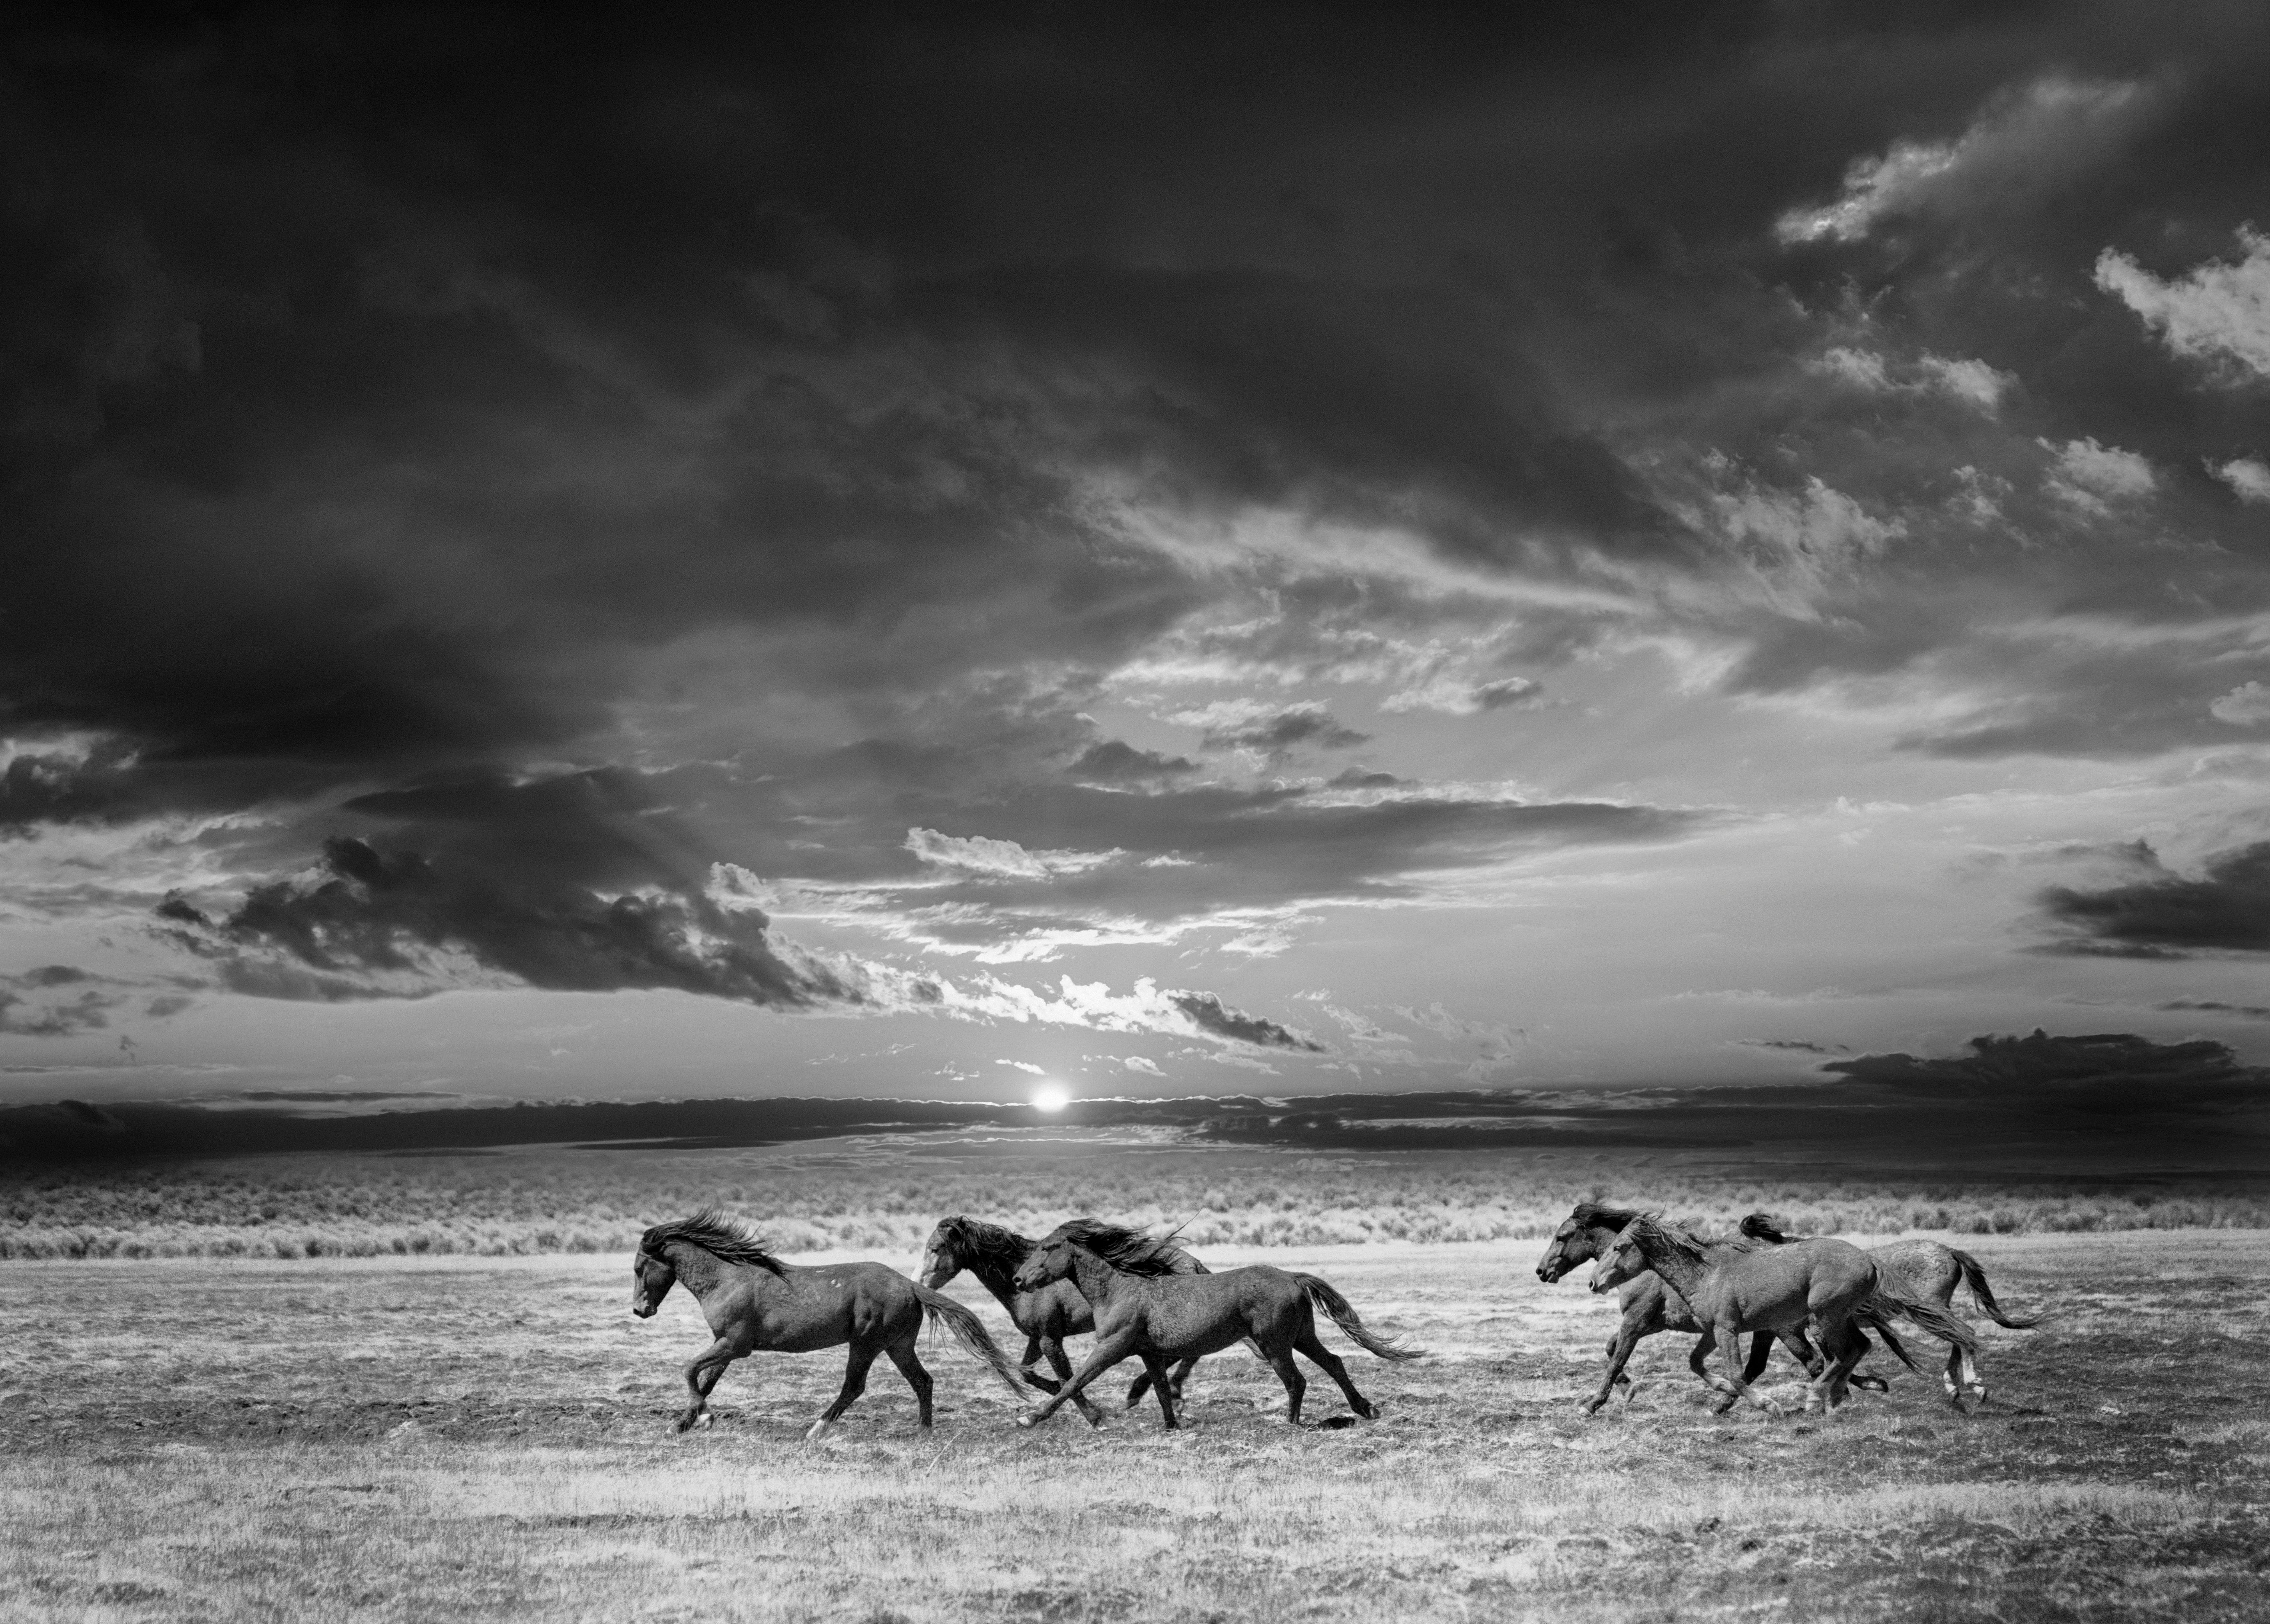 Shane Russeck Animal Print - "Chasing the Light" 40x50 Wild Horses, Black and White Photography Mustangs Art